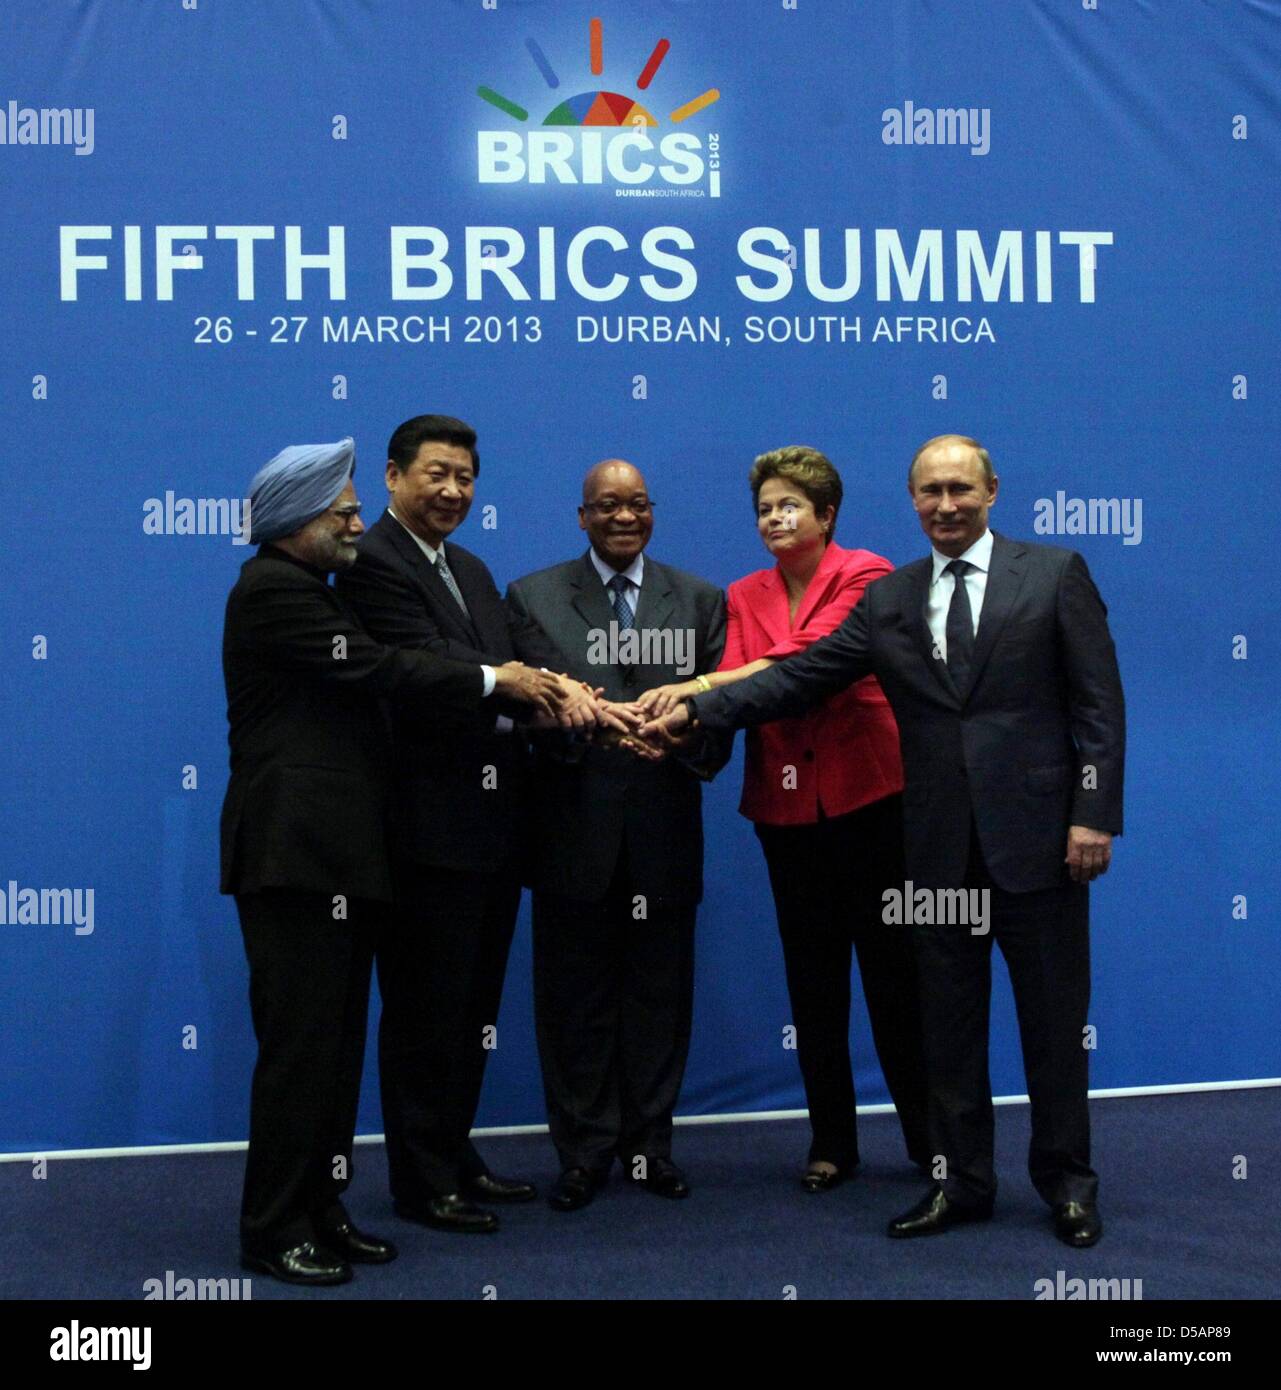 Durban, South Africa. 27th March 2013. Indian Prime Minister Manmohan Singh, Chinese President Xi Jinping, South African President Jacob Zuma, Brazilian President Dilma Rousseff and Russian President Vladimir Putin at the BRICS summit on March 27, 2013, in Durban, South Africa. South Africa hosted the fifth BRICS Summit at the Durban International Convention Centre (ICC) on March 26 and 27, 2013. This will complete the first cycle of BRICS summits. (Photo by Gallo Images / The Times / Thuli Dlamini/Alamy Live News) Stock Photo